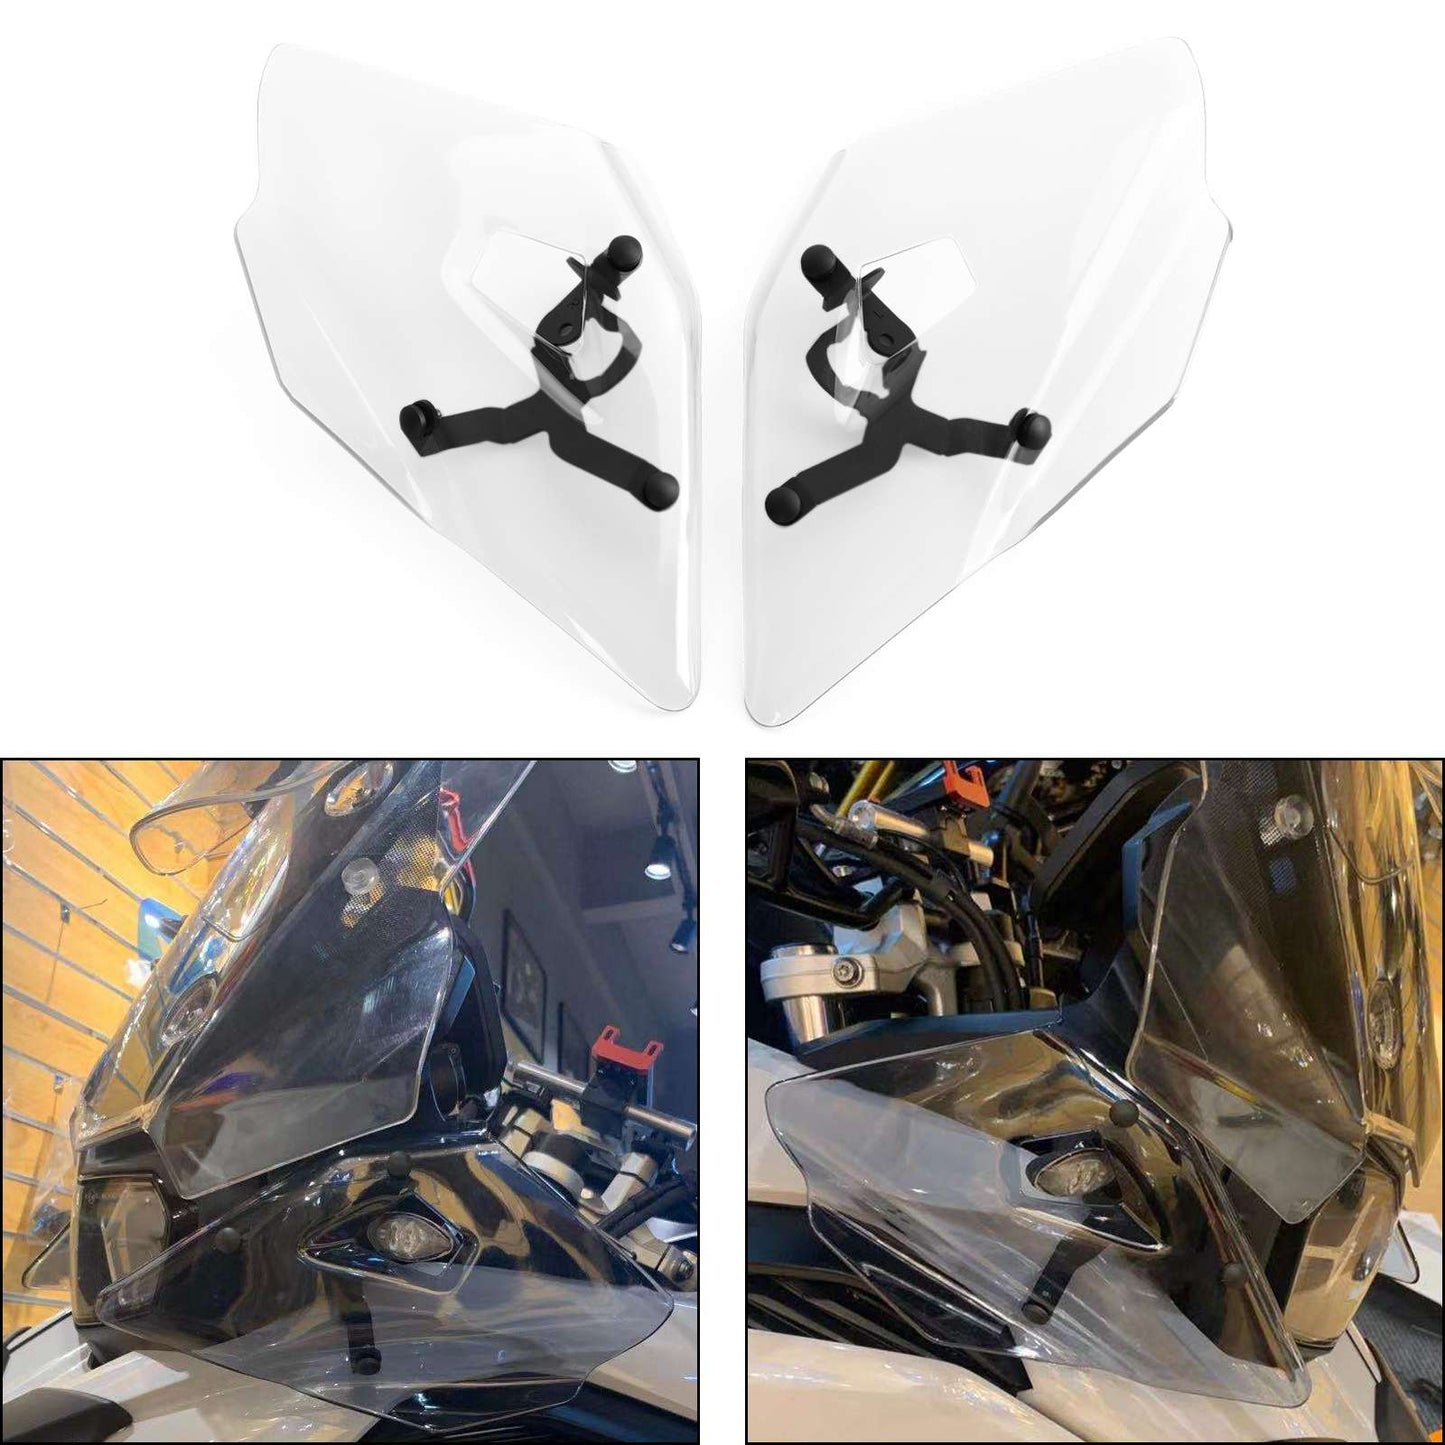 Motorcycle Deflector Side Top for BMW R1200GS R1250GS LC ADV F750GS F850GS